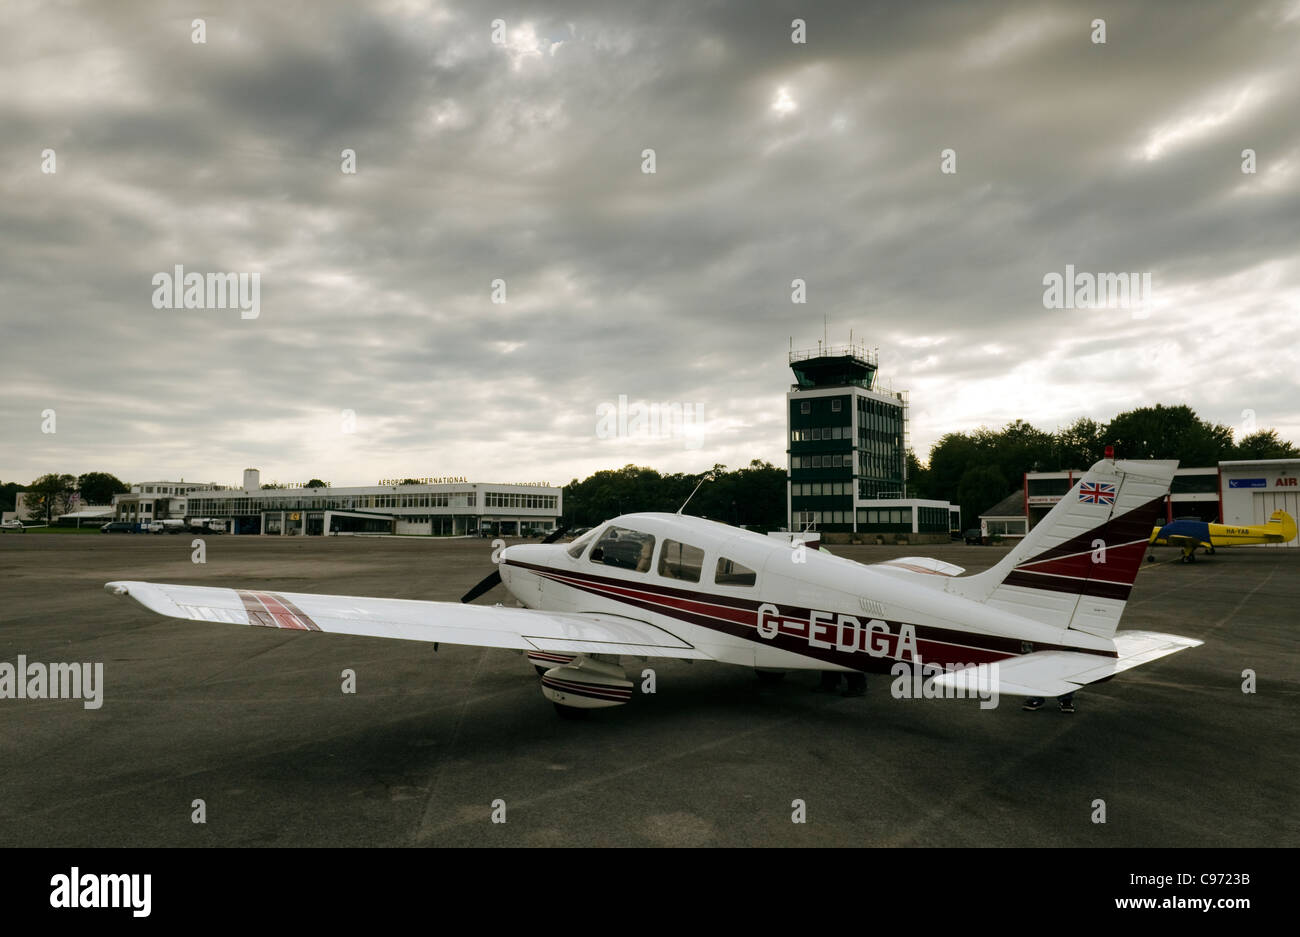 Stationary light aircraft standing at Le Touquet airfield in France Stock Photo